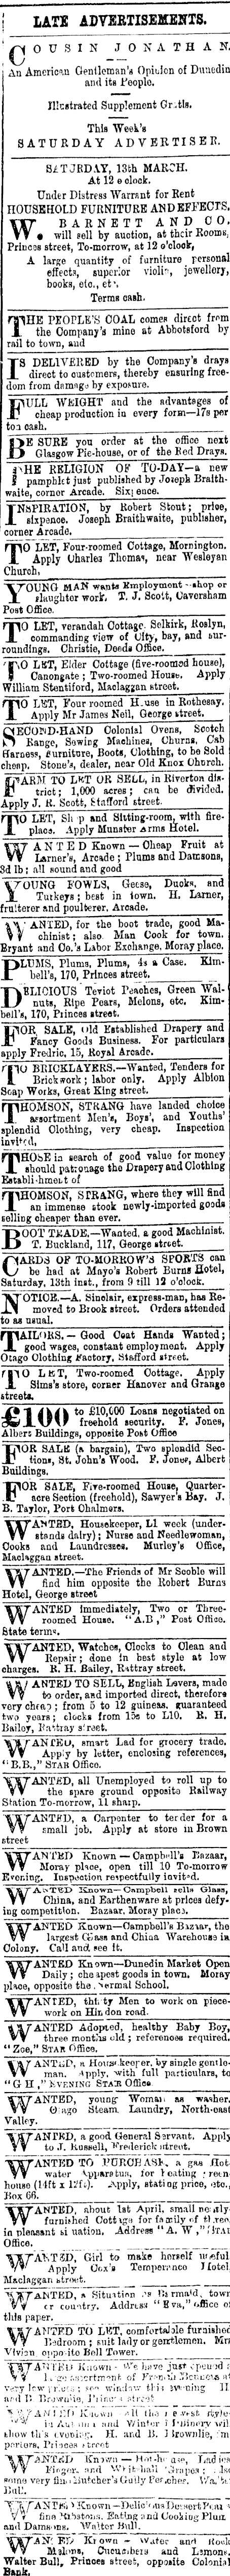 Papers Past | Newspapers | Evening Star | 12 March 1880 | Page 3  Advertisements Column 2